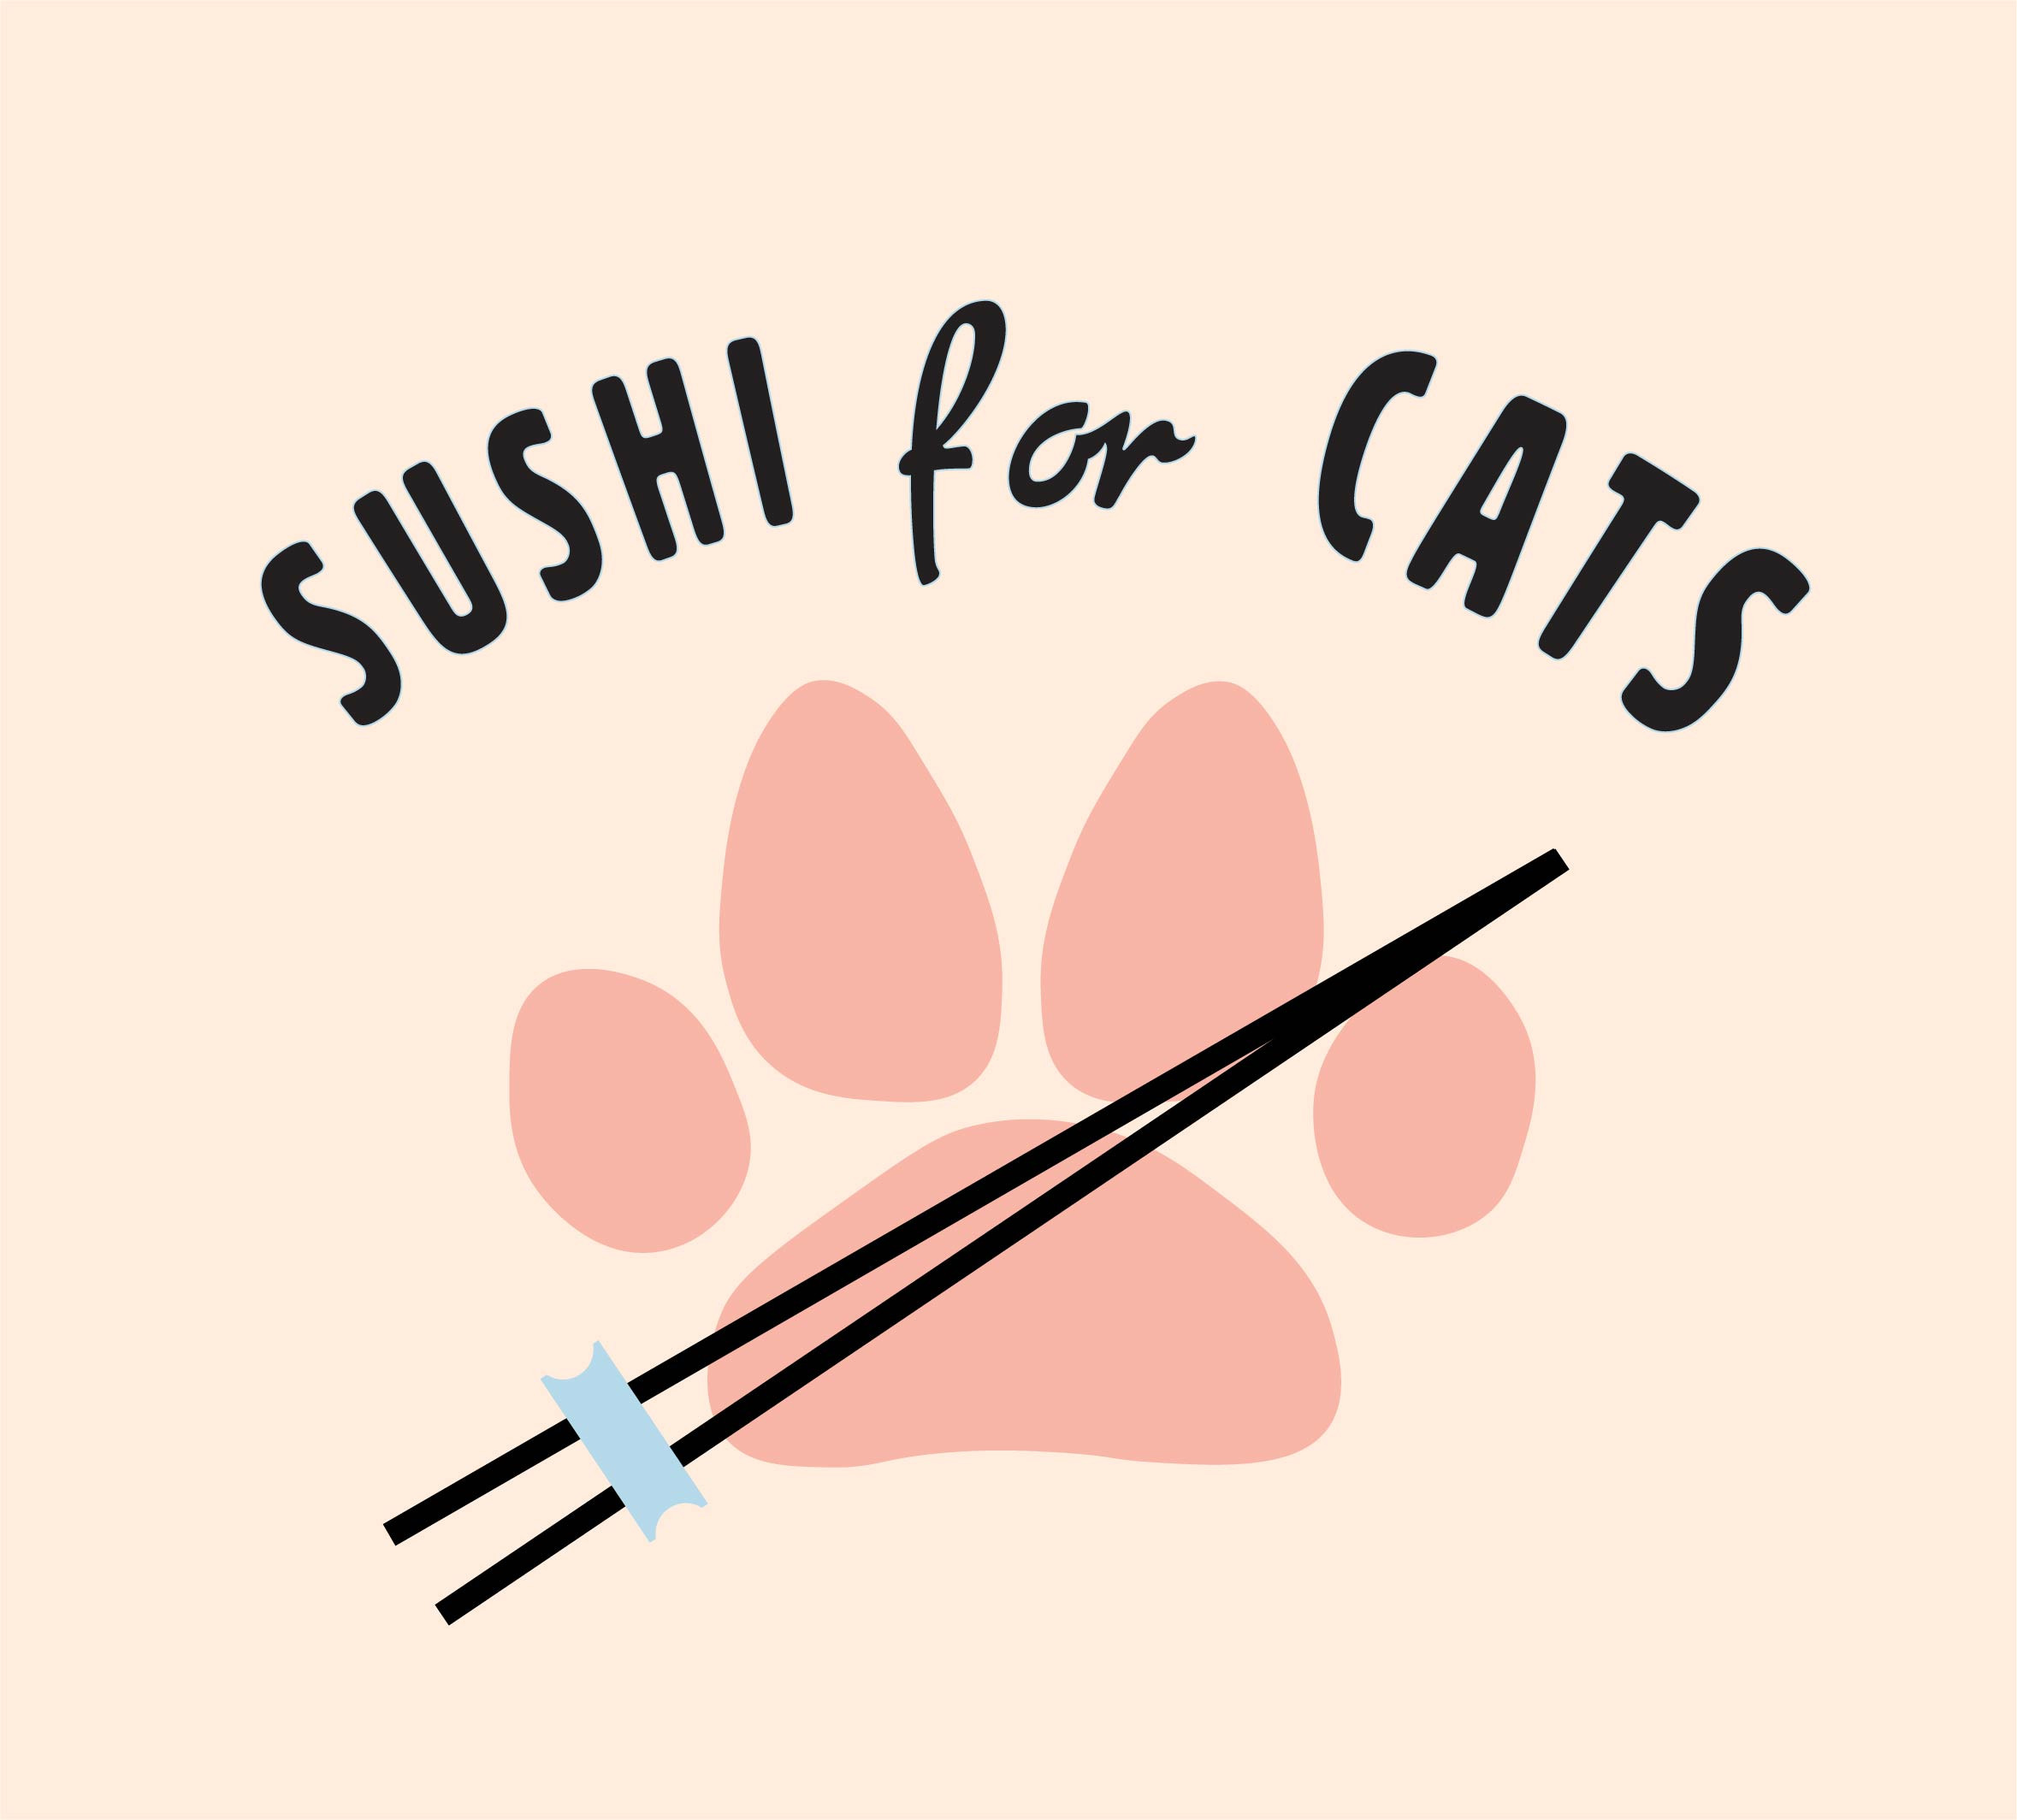 Sushi for Cats logo